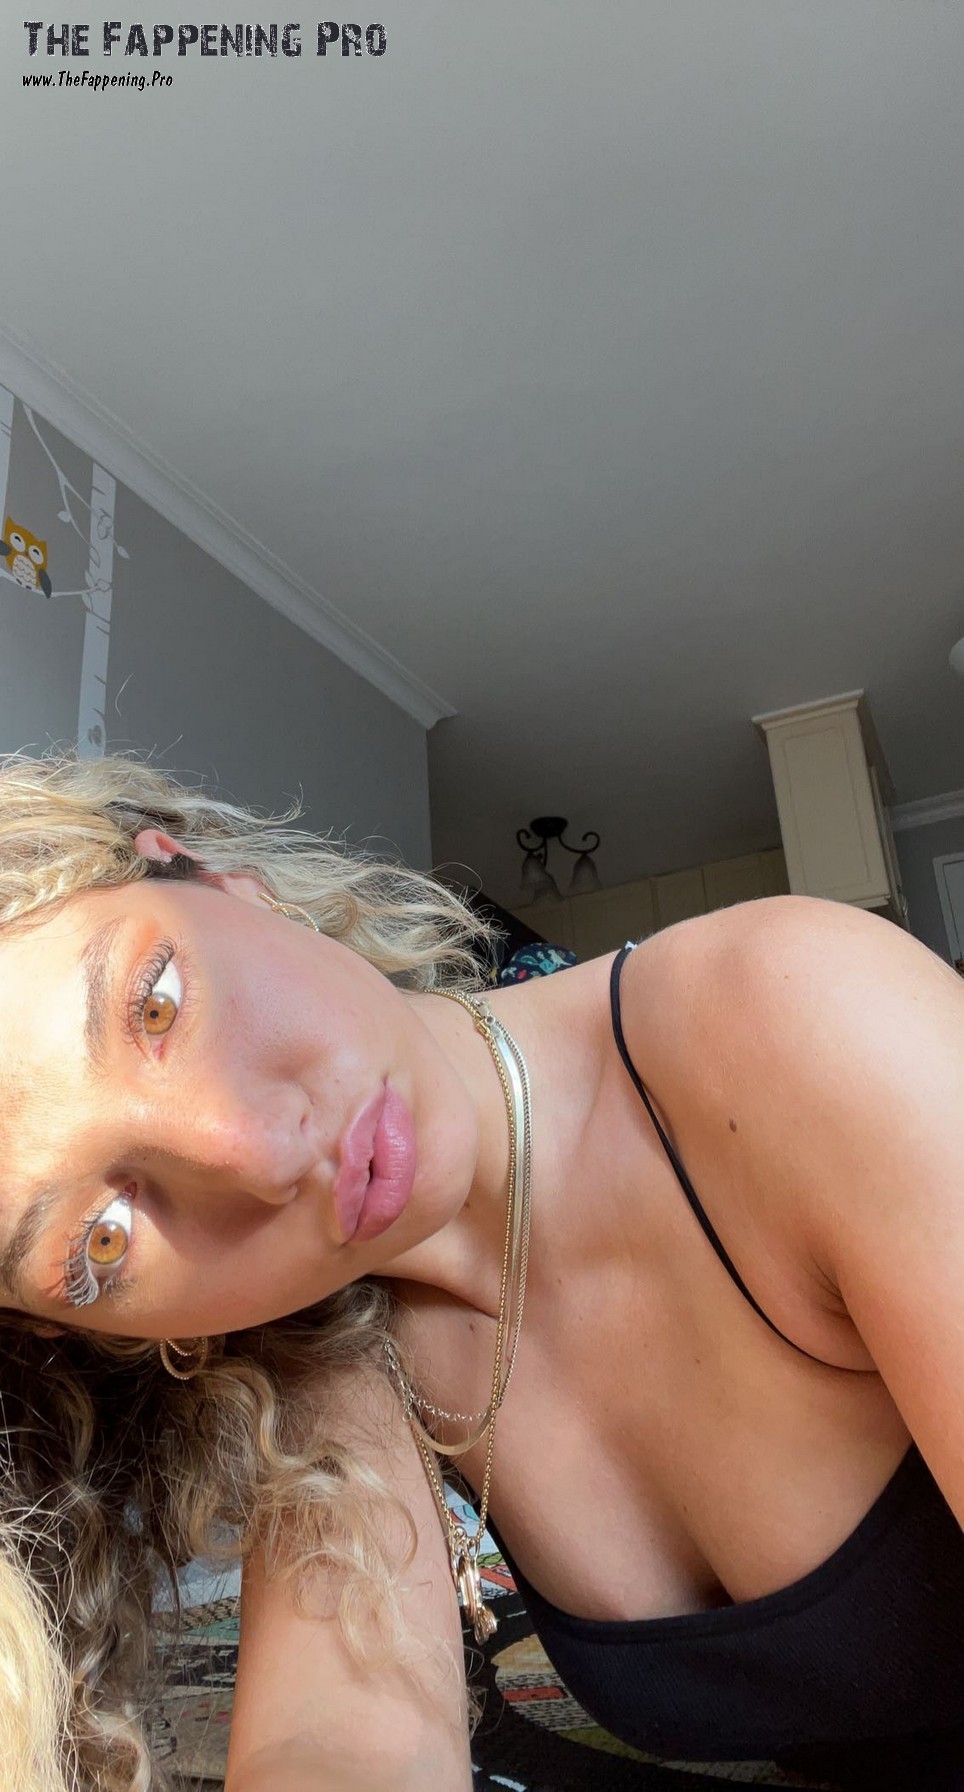 Overtime Megan Nude Leaked TheFappening.Pro 42 - Megan Eugenio aka Overtime Megan Nude TikTok Star From Massachusetts (Over 100 Leaked Photos)